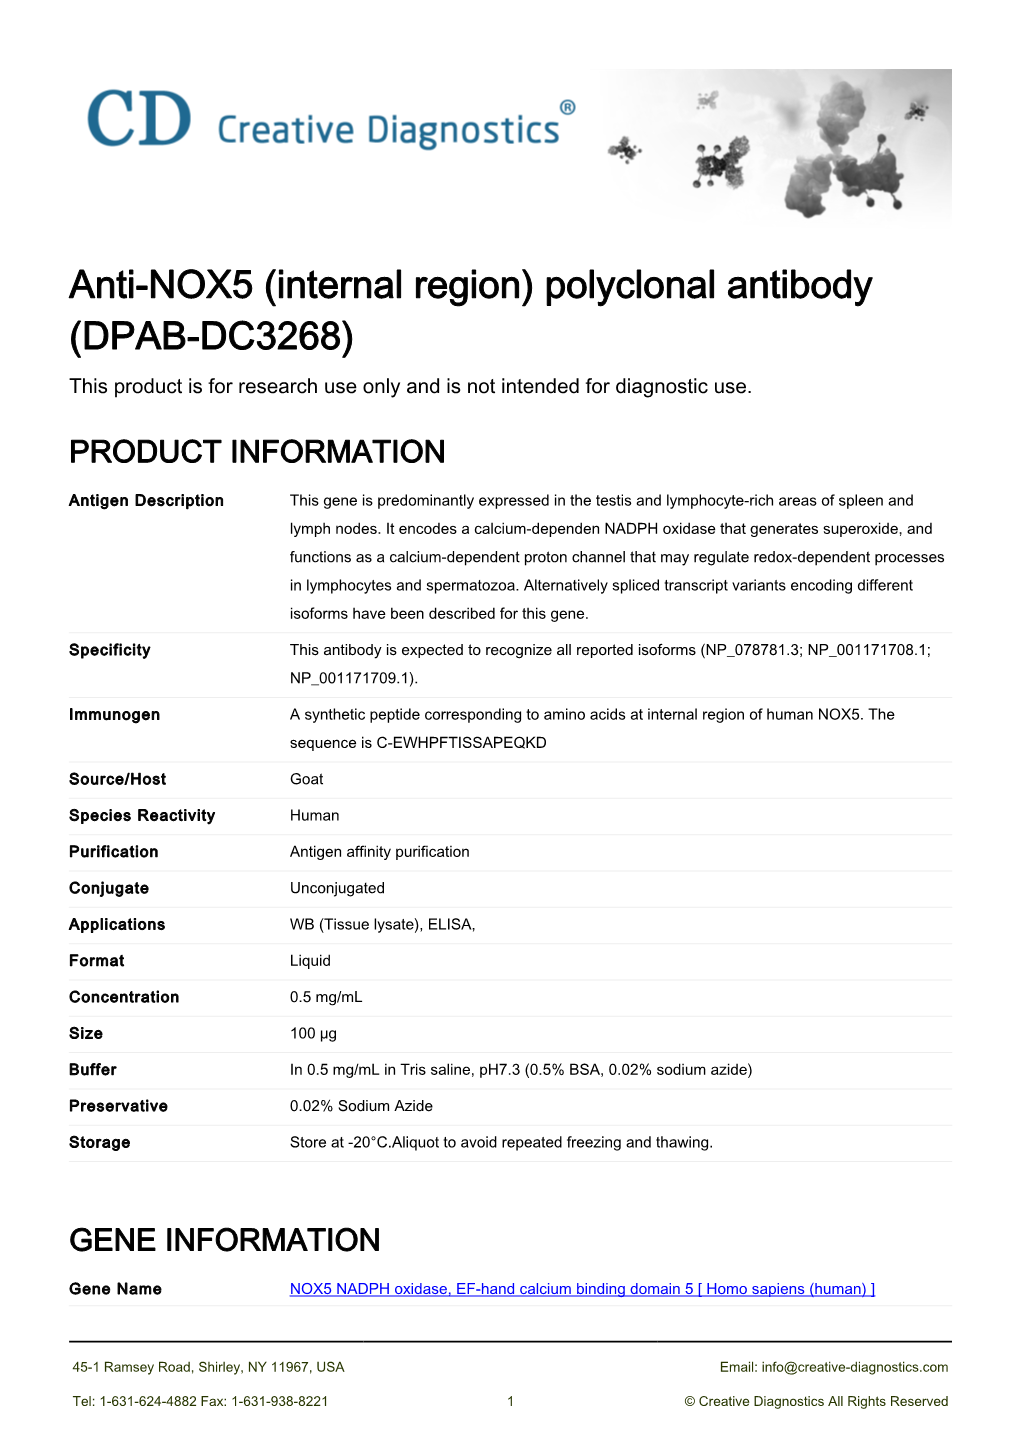 Anti-NOX5 (Internal Region) Polyclonal Antibody (DPAB-DC3268) This Product Is for Research Use Only and Is Not Intended for Diagnostic Use